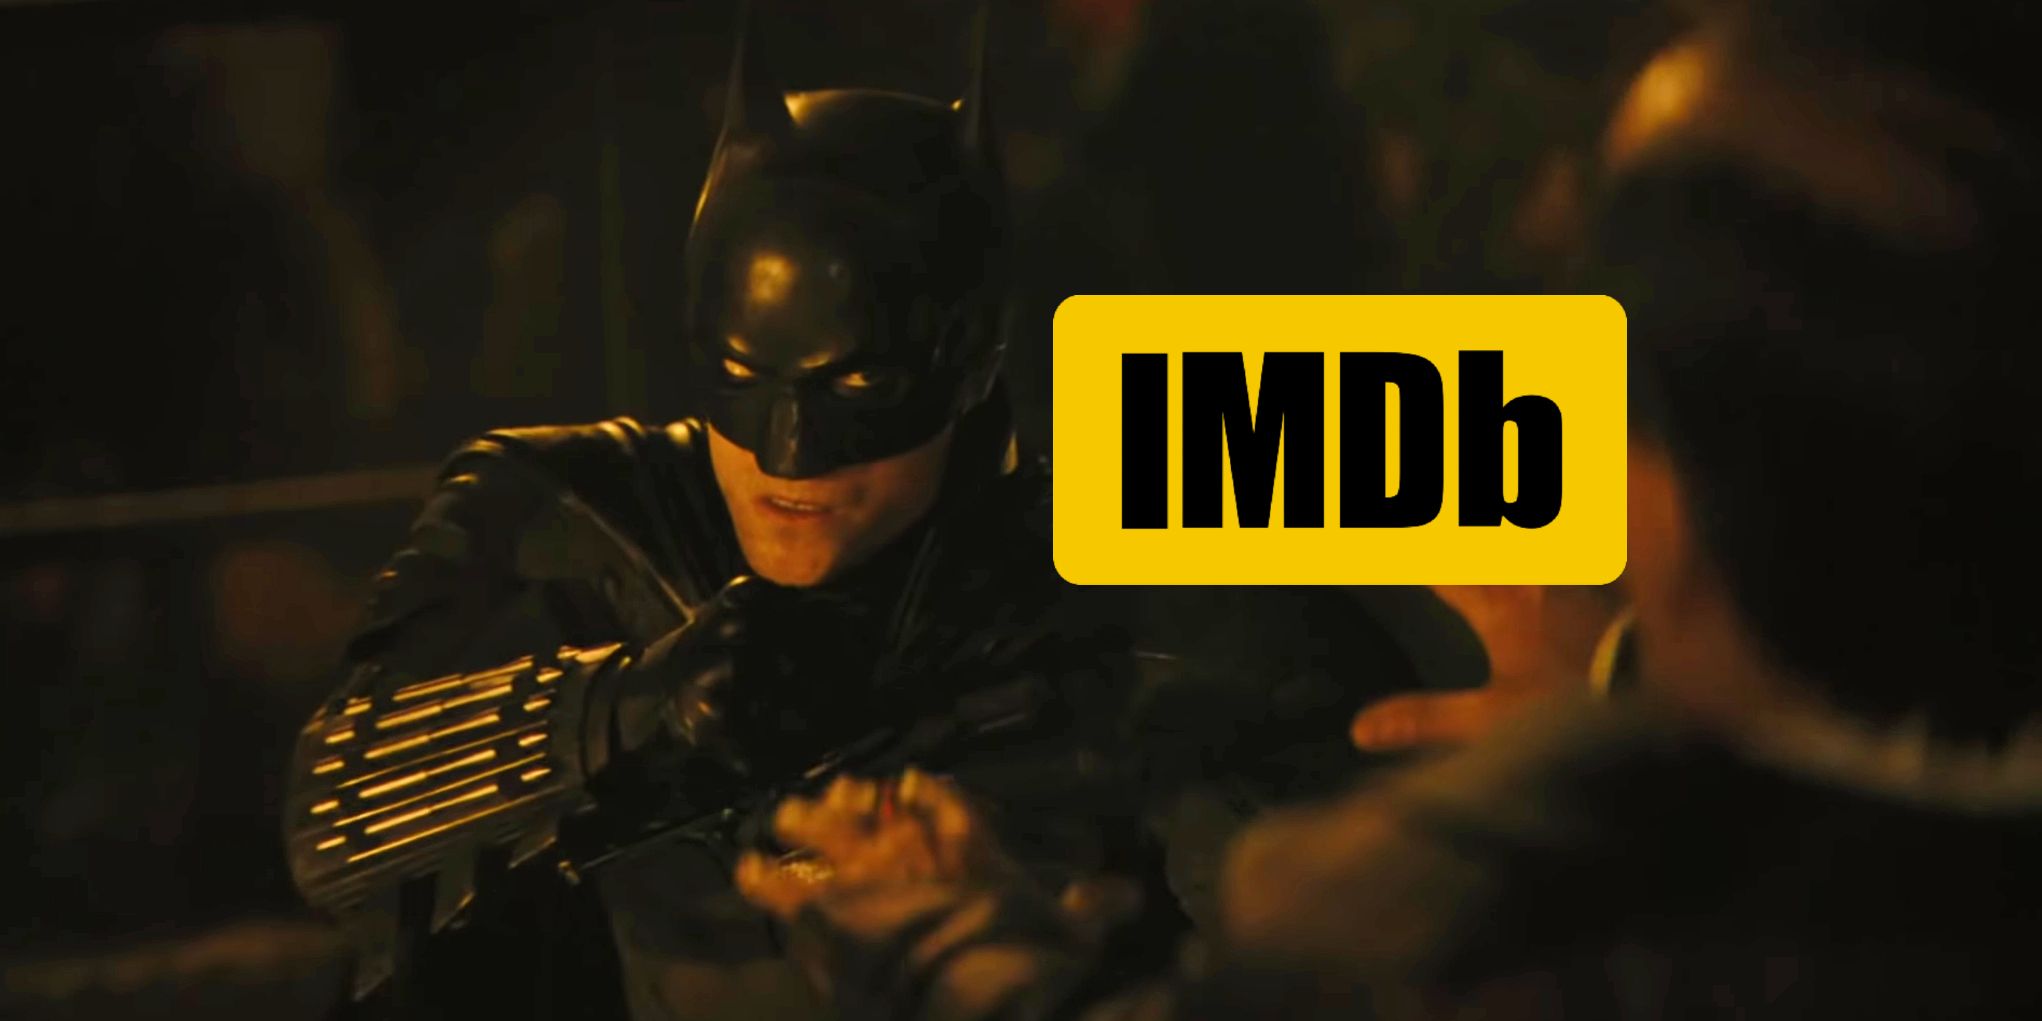 The Batman' and 'Stranger Things' Top IMDB Movies and Shows Of 2022